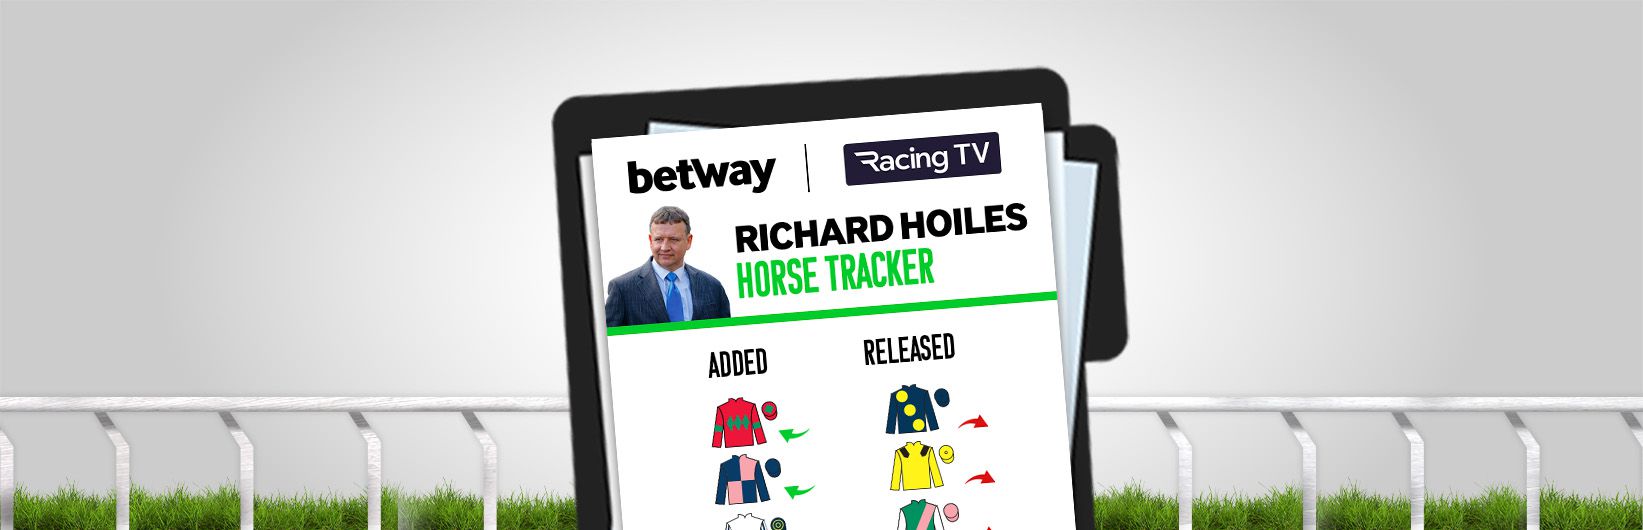 Richard Hoiles: 3 in and 4 out for my horse tracker